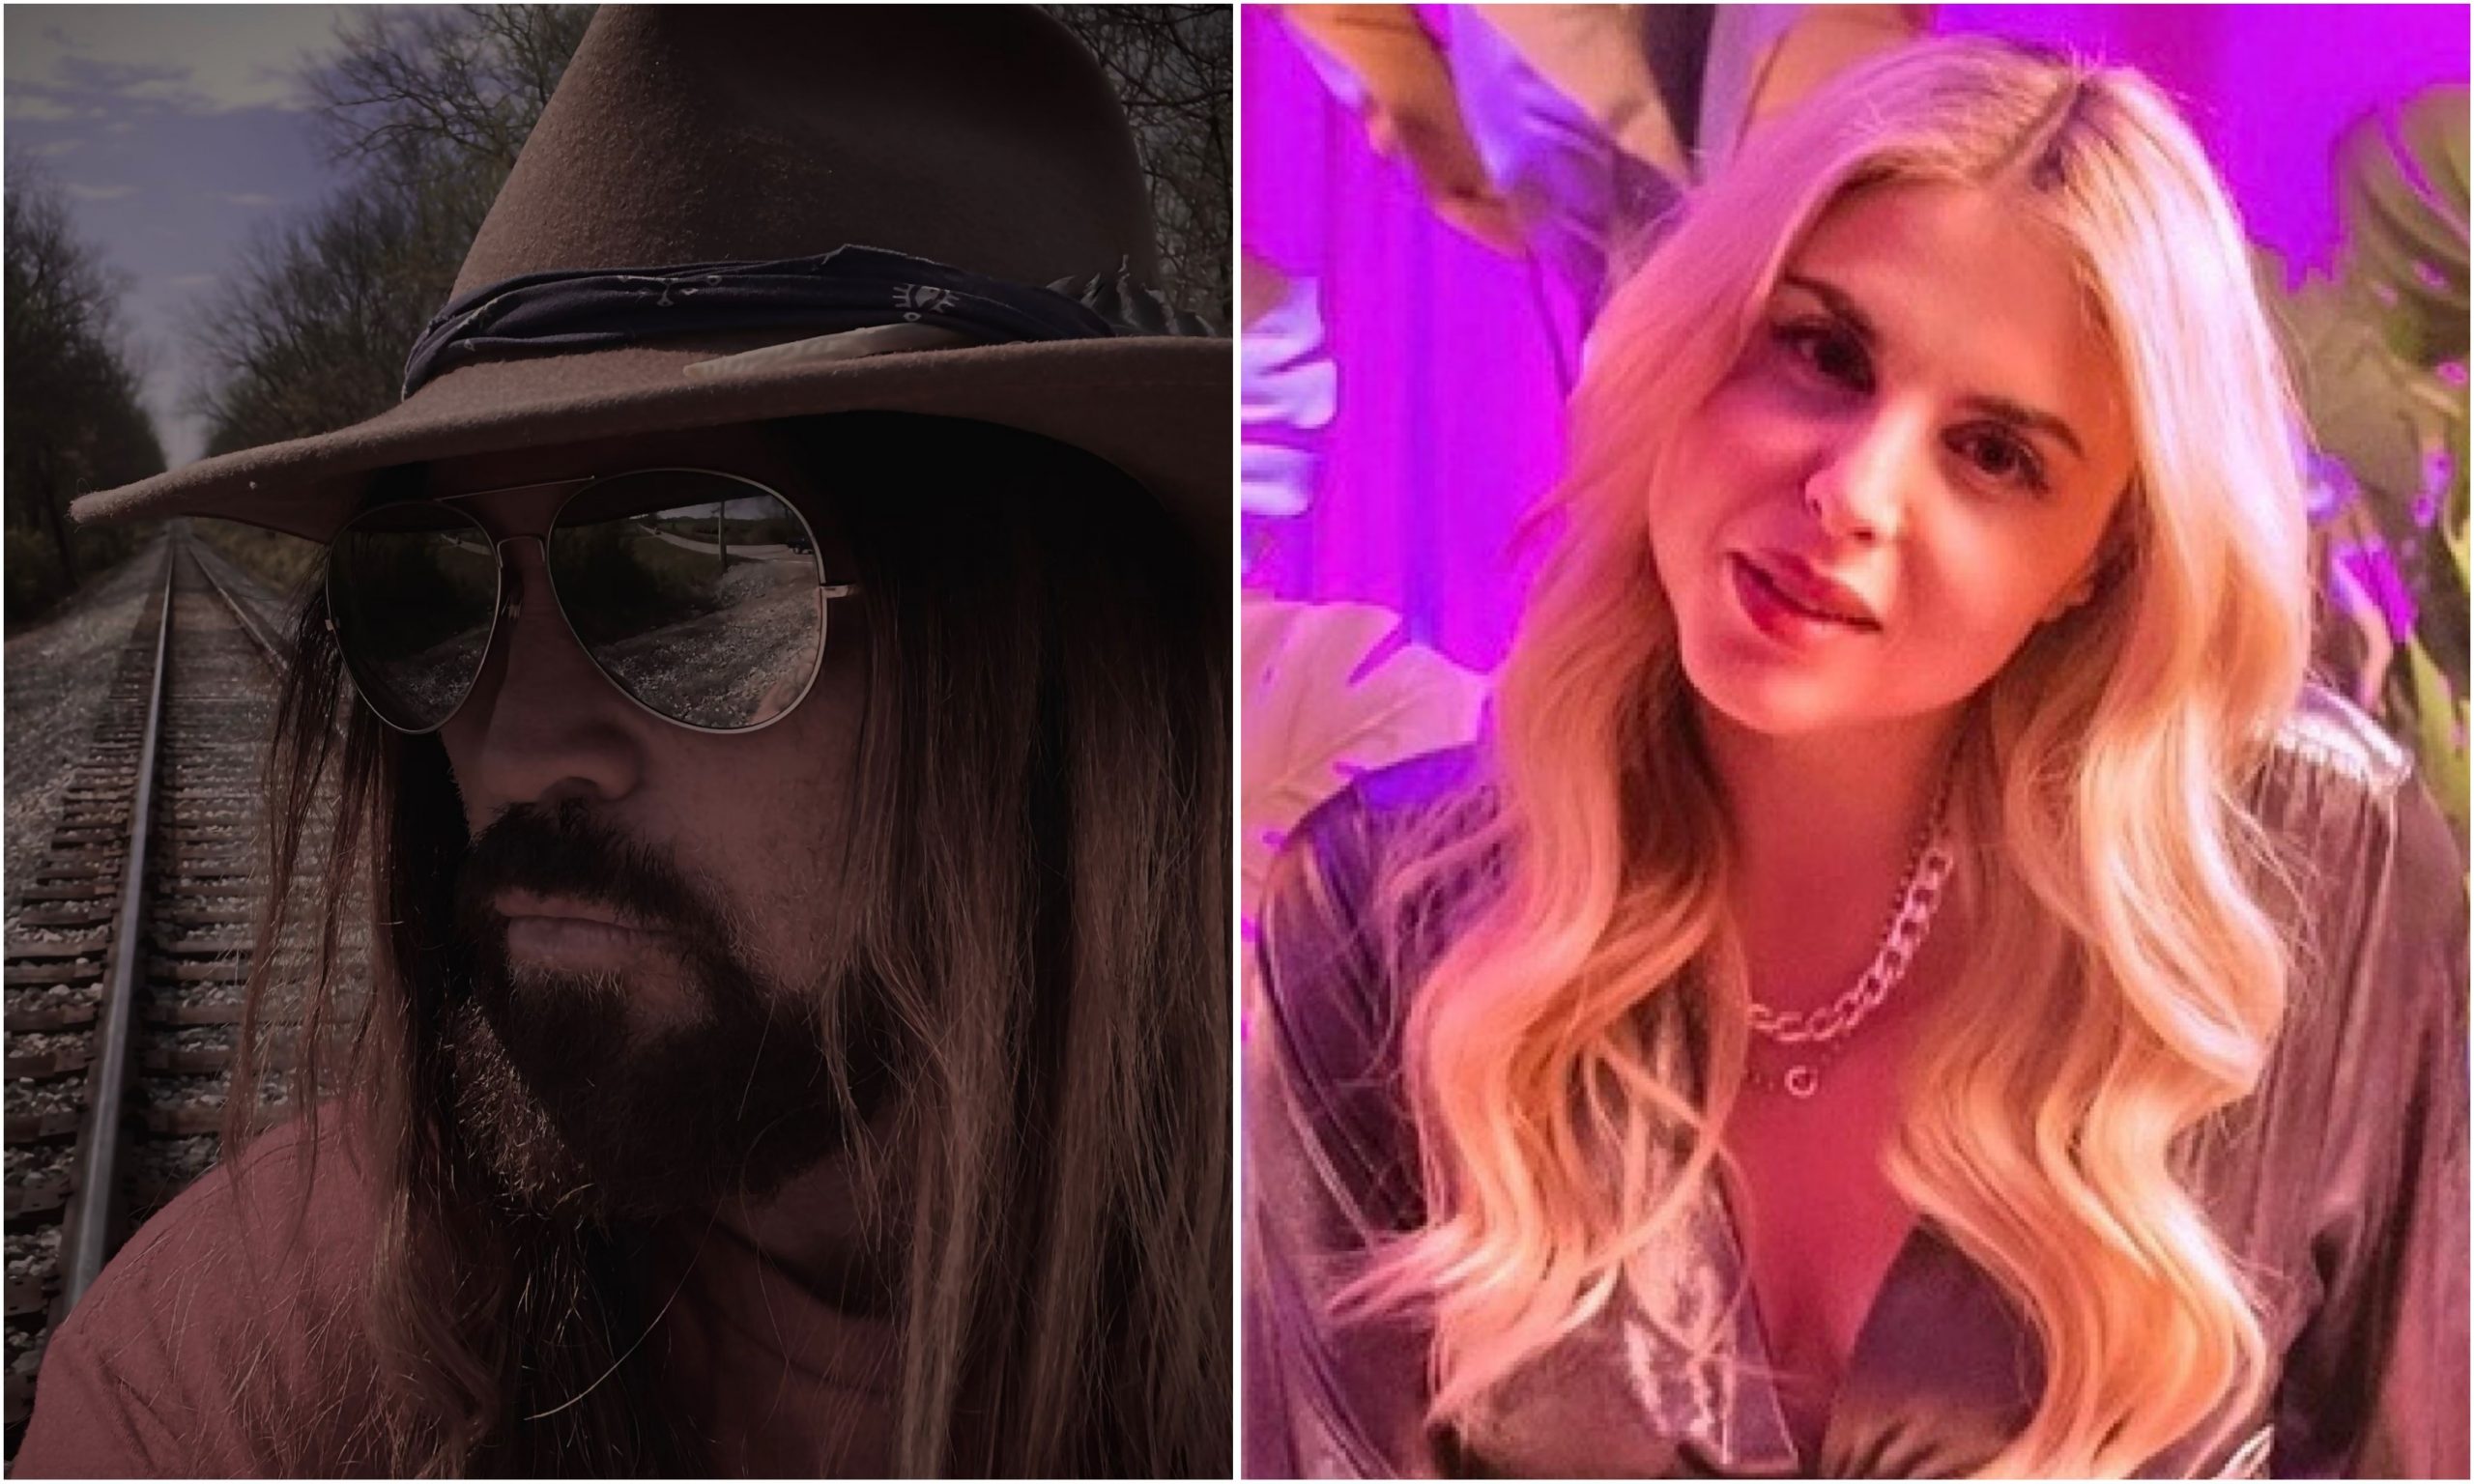 Billy Ray Cyrus shares new photo with fiancée Firerose: 'Happiness